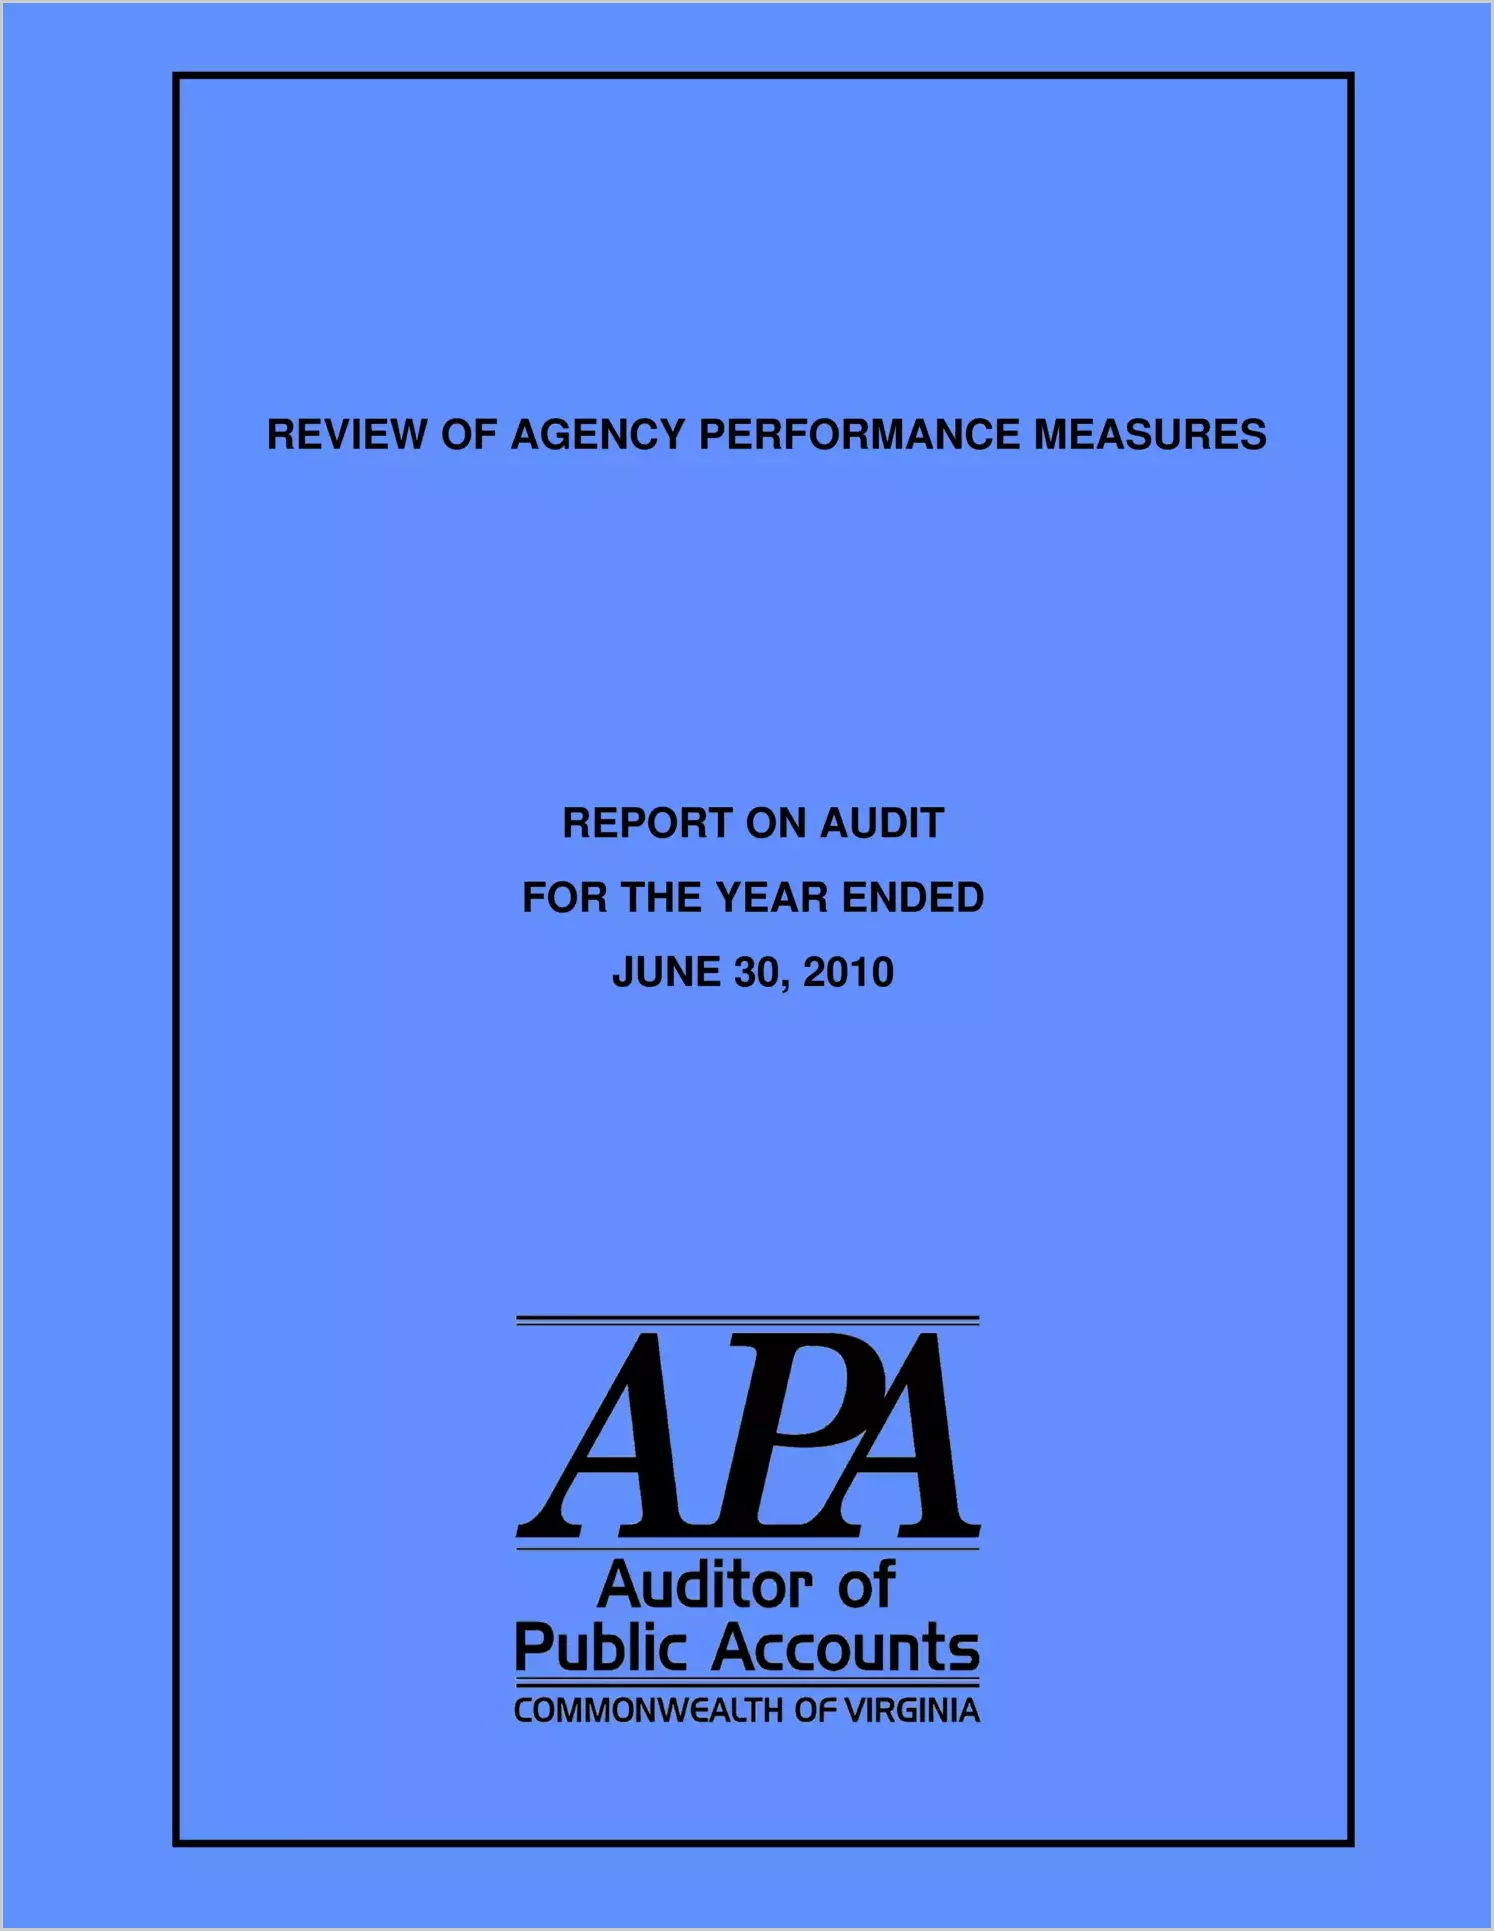 Review of Agency Performance Measures report on Audit for the year ended June 30, 2010